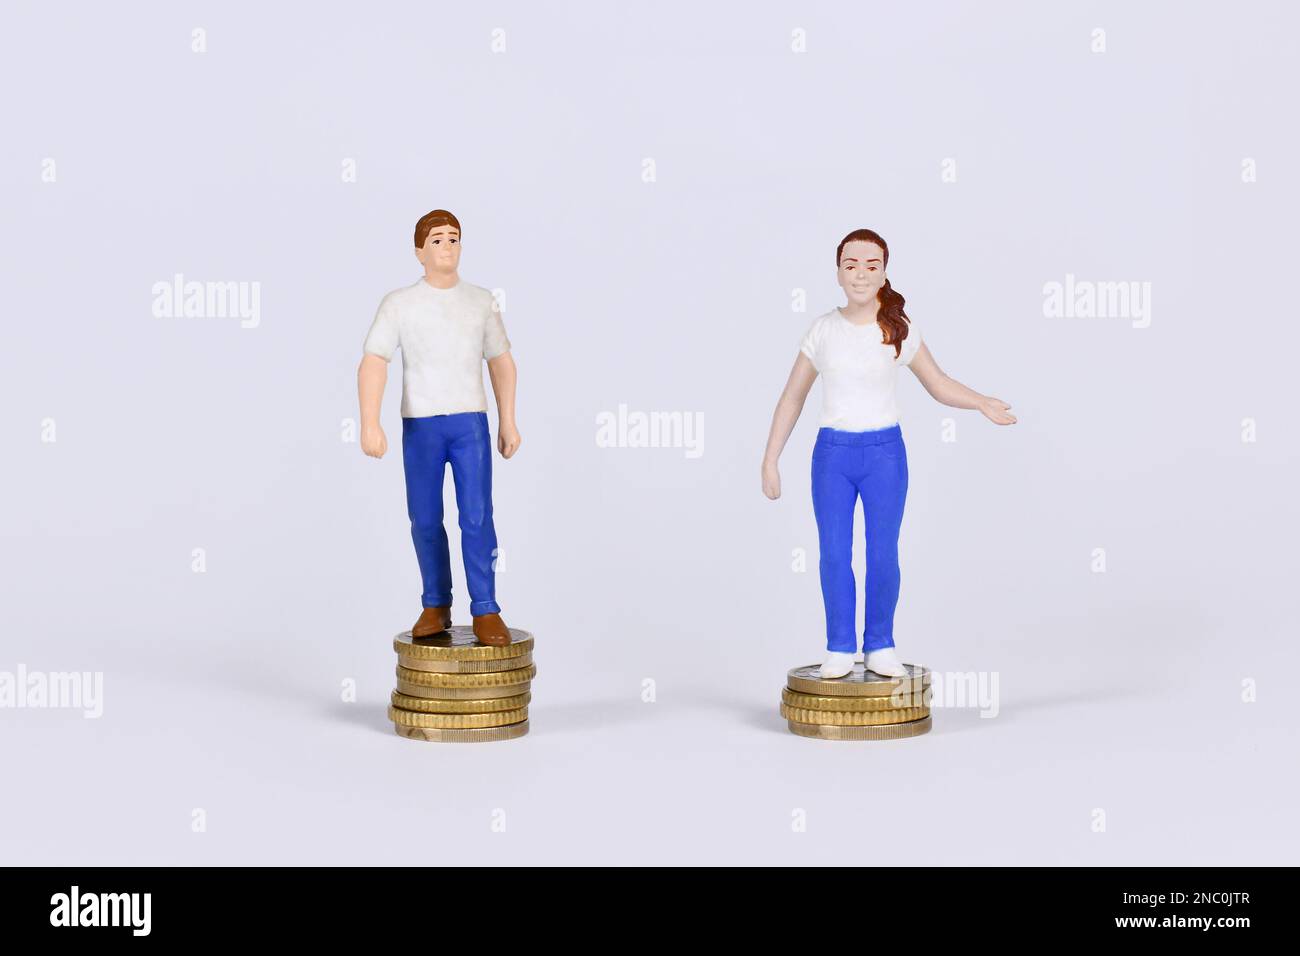 Gender pay gap concept with man and woman standing on different amount of coins Stock Photo